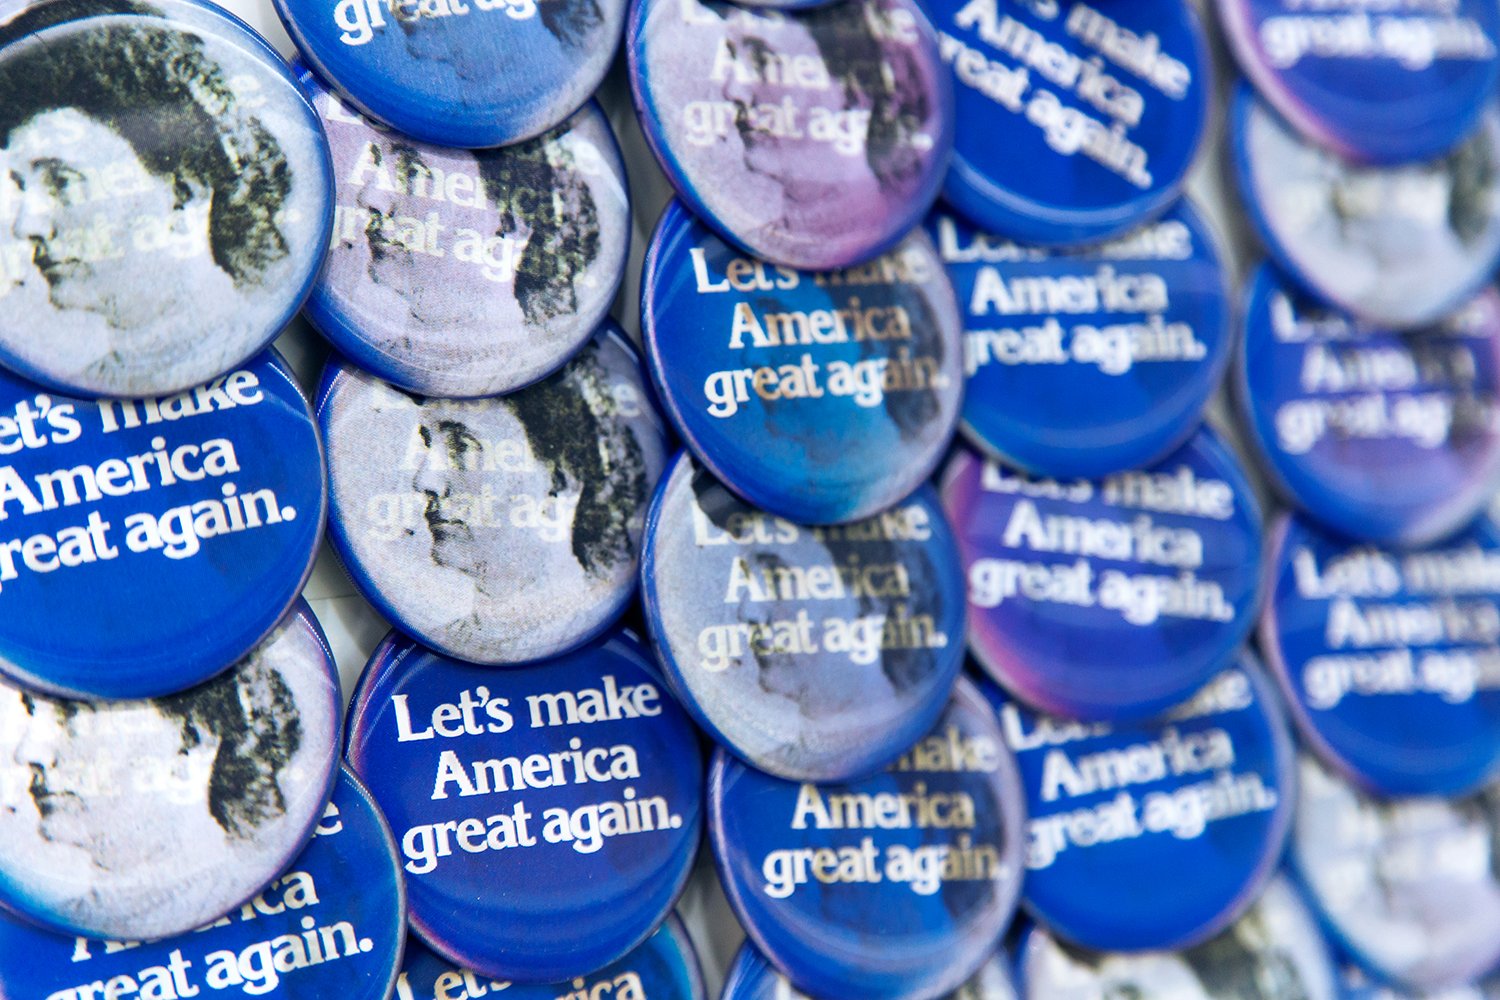   Rec-elections (Let's make America great again., Isabel González),  2016 Lenticular campaign buttons 3 inch diameter 